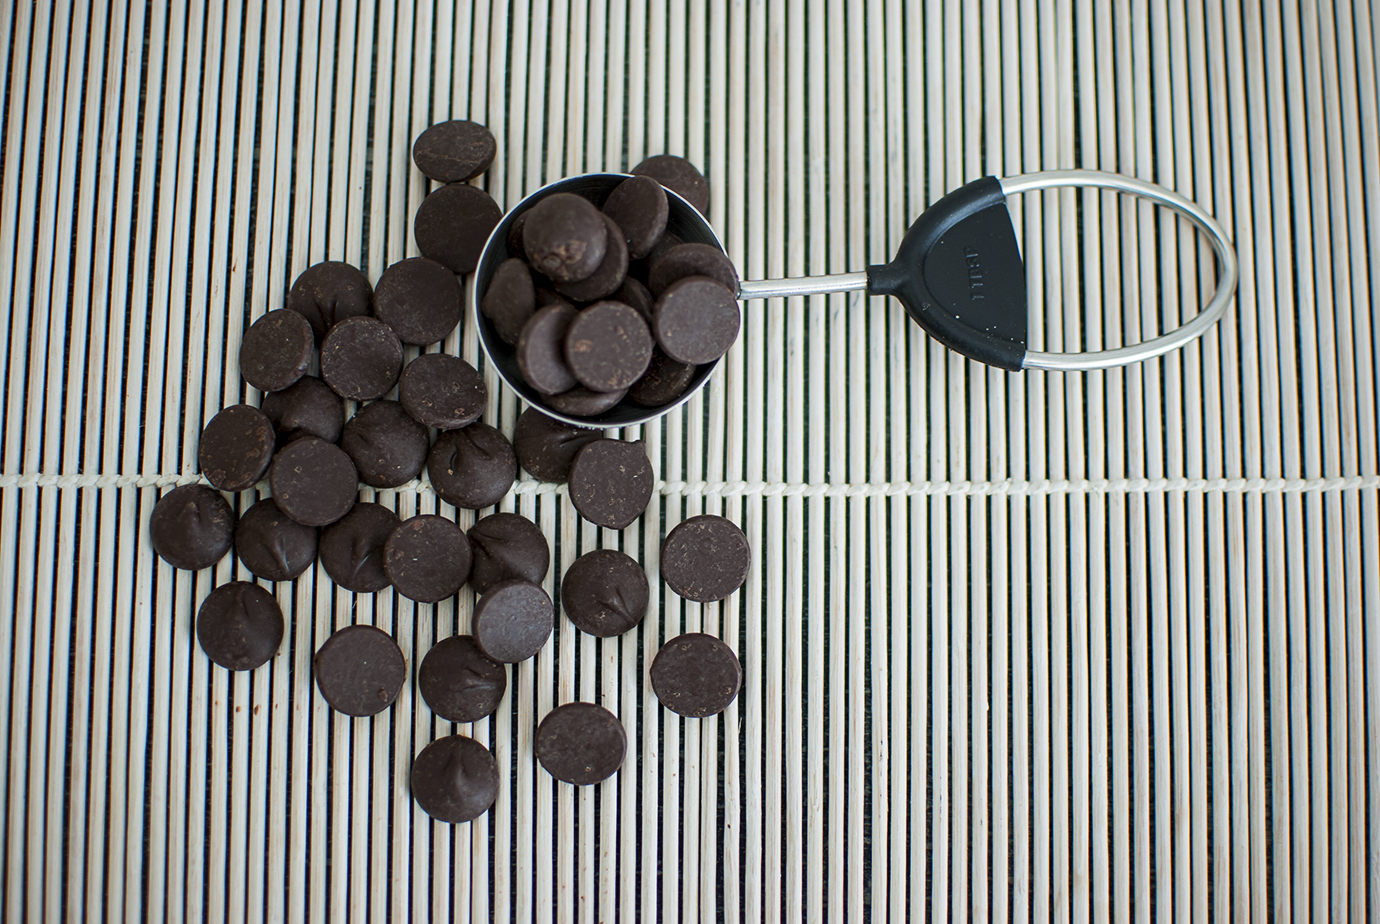 A Tablespoon of Chocolate Chips